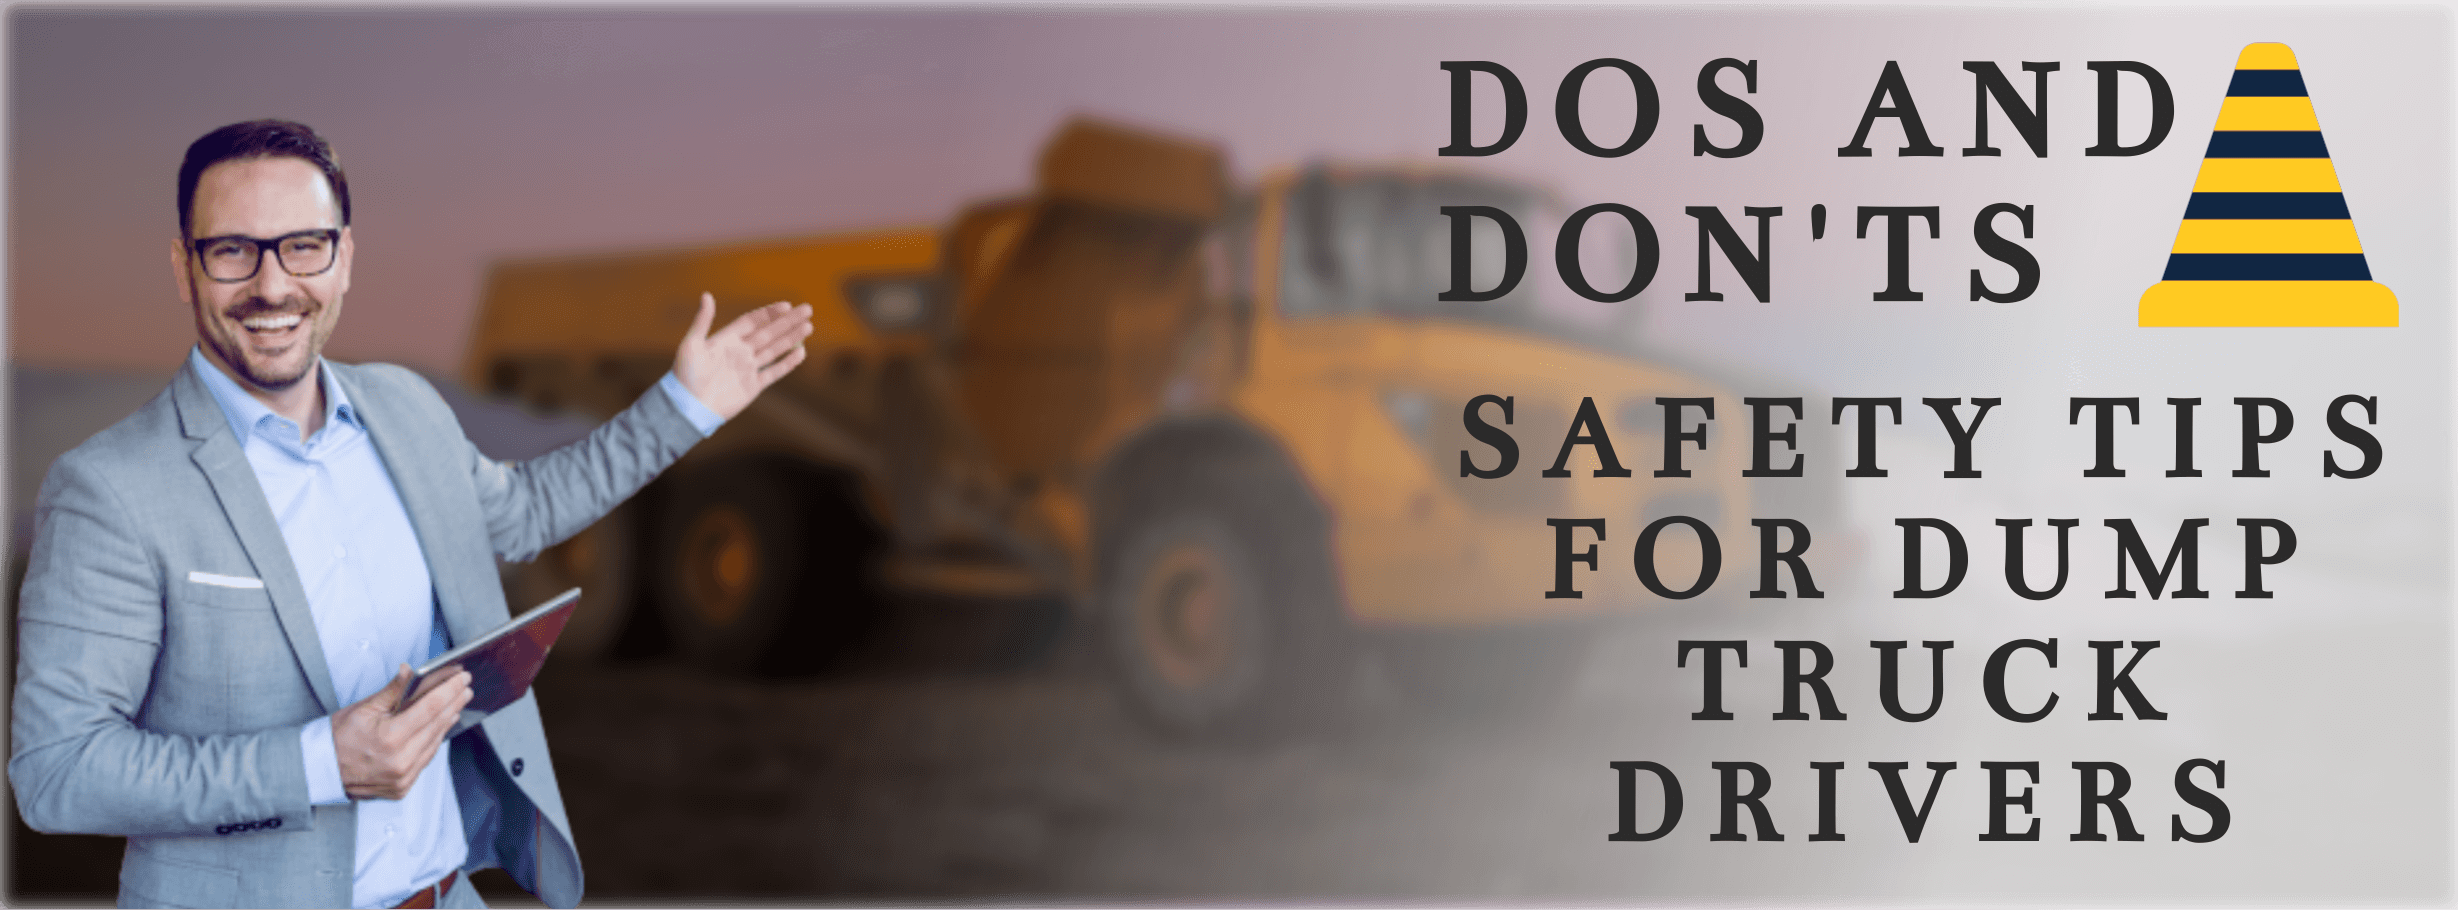 Safety Tips for Dump Truck Drivers